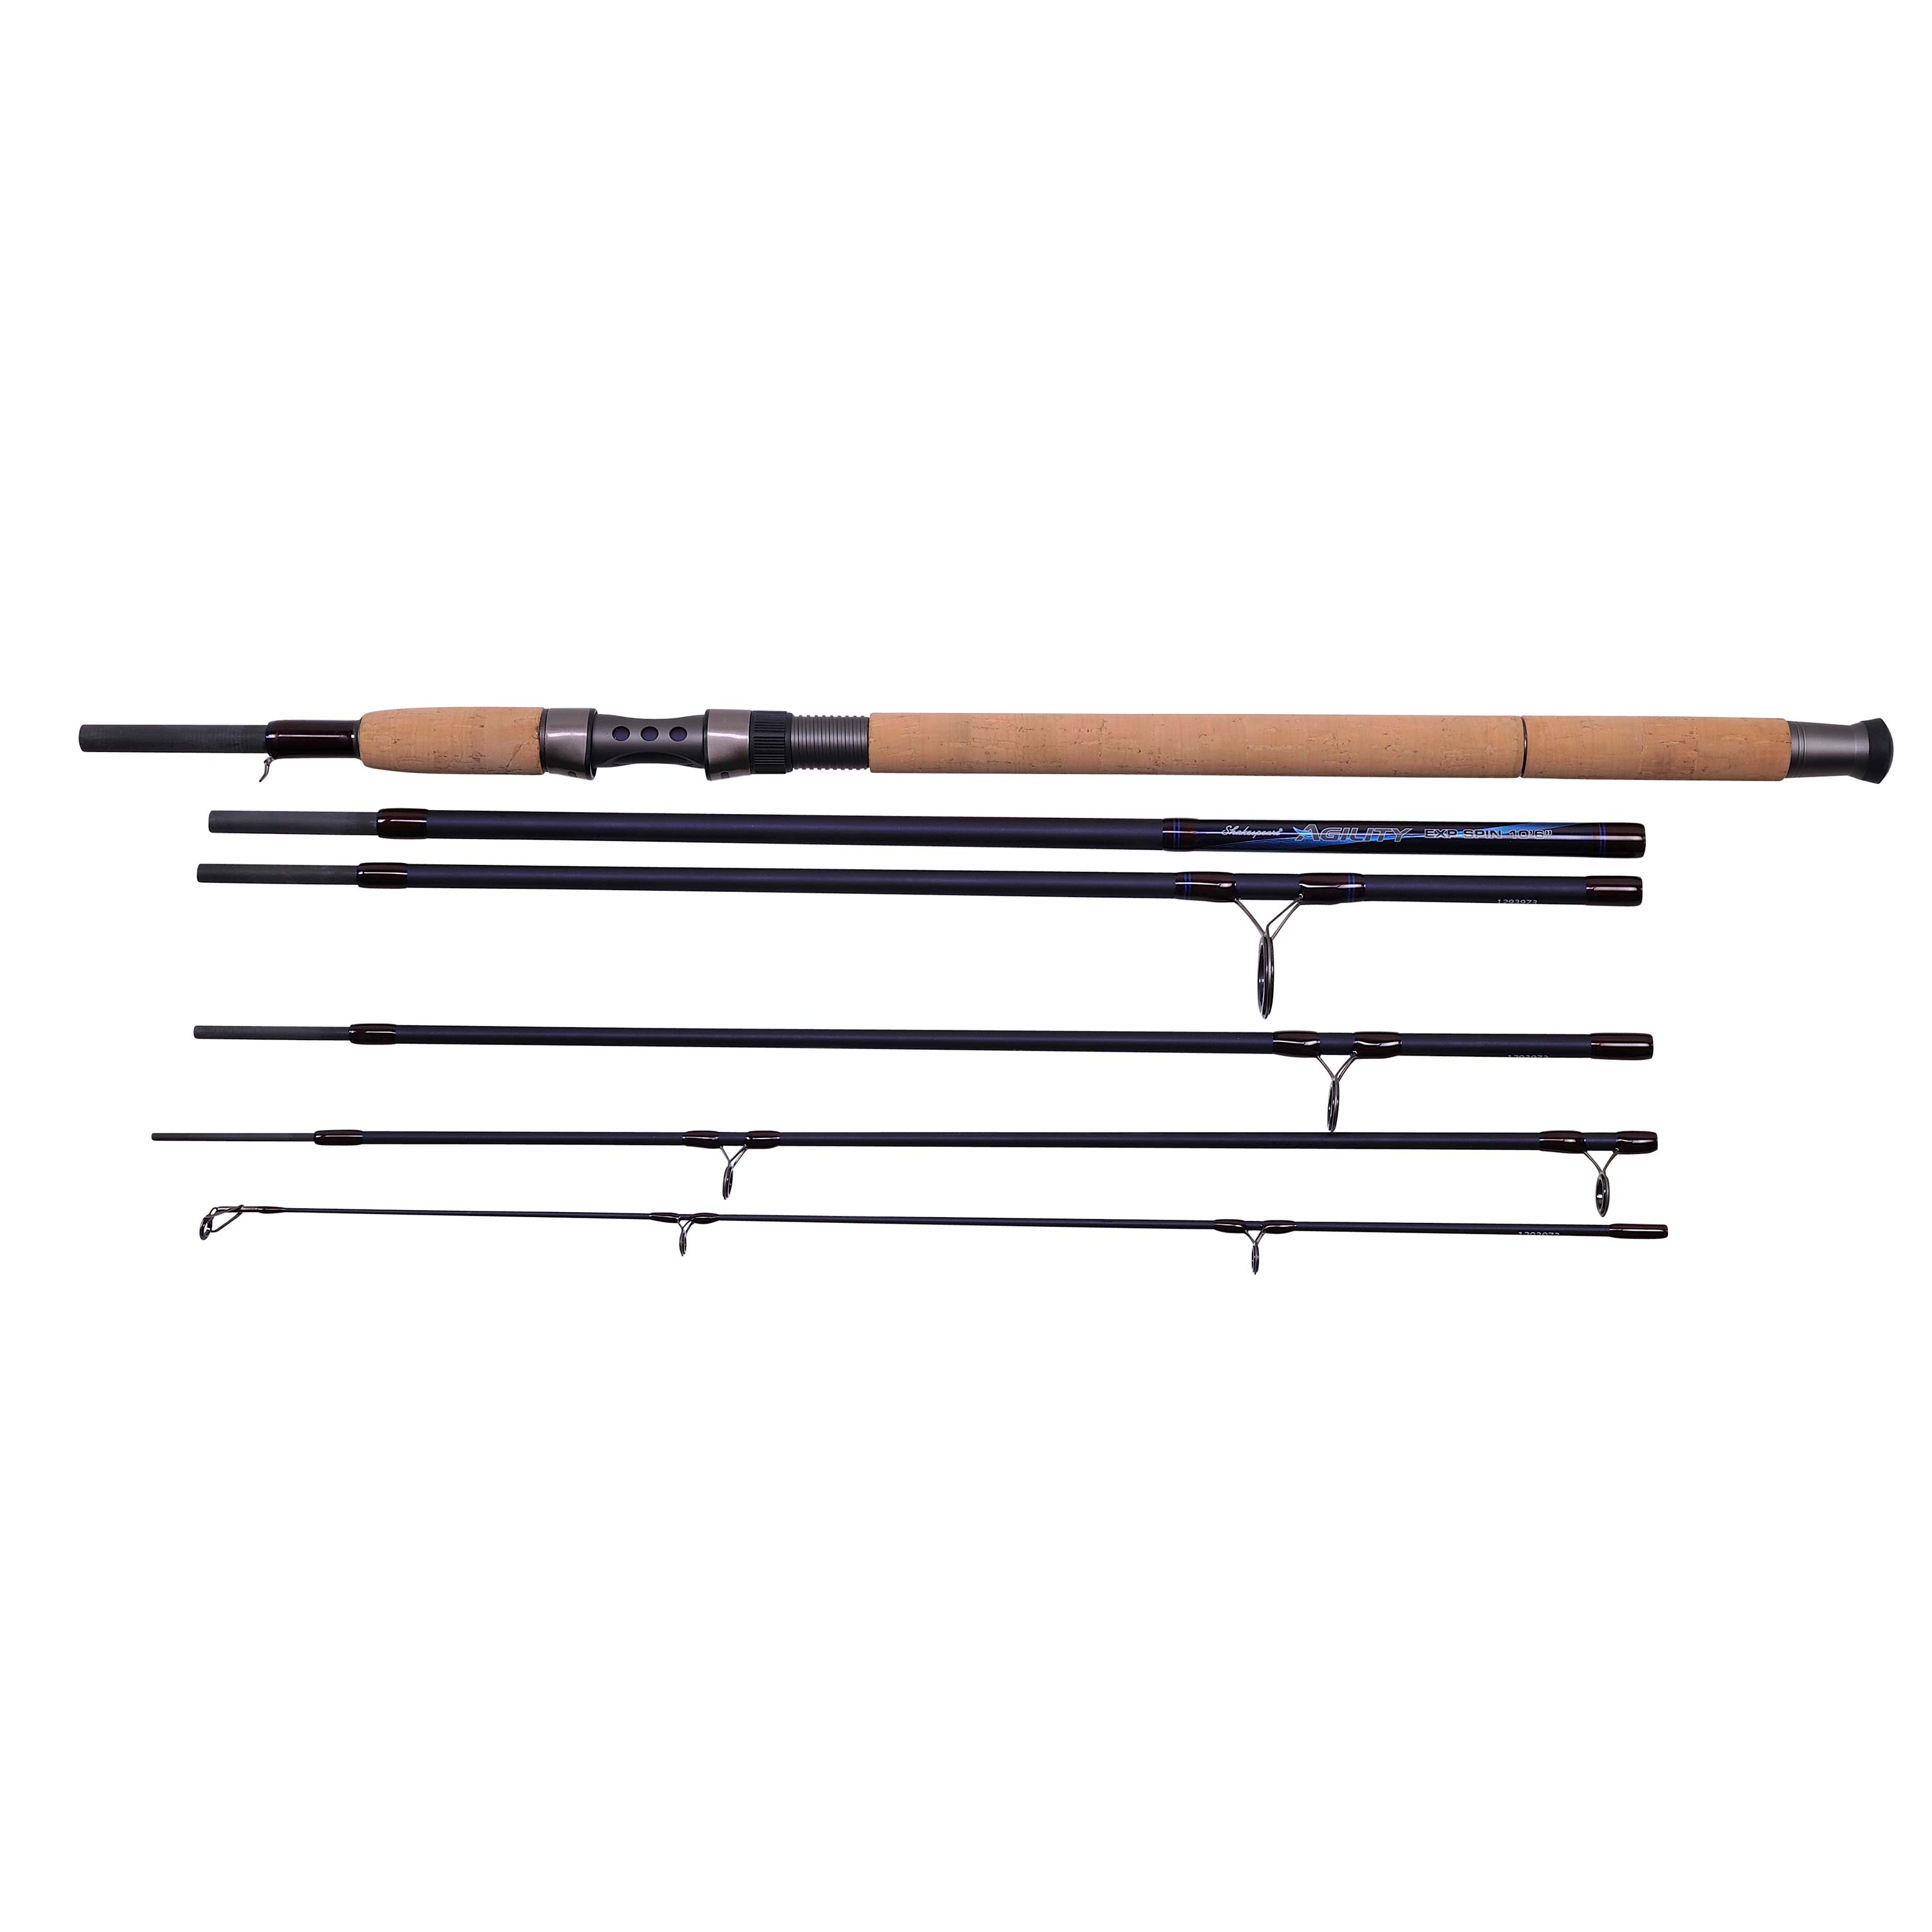 Shakespeare Agility EXP Spin Rod - Travel Spinning Fishing Rods